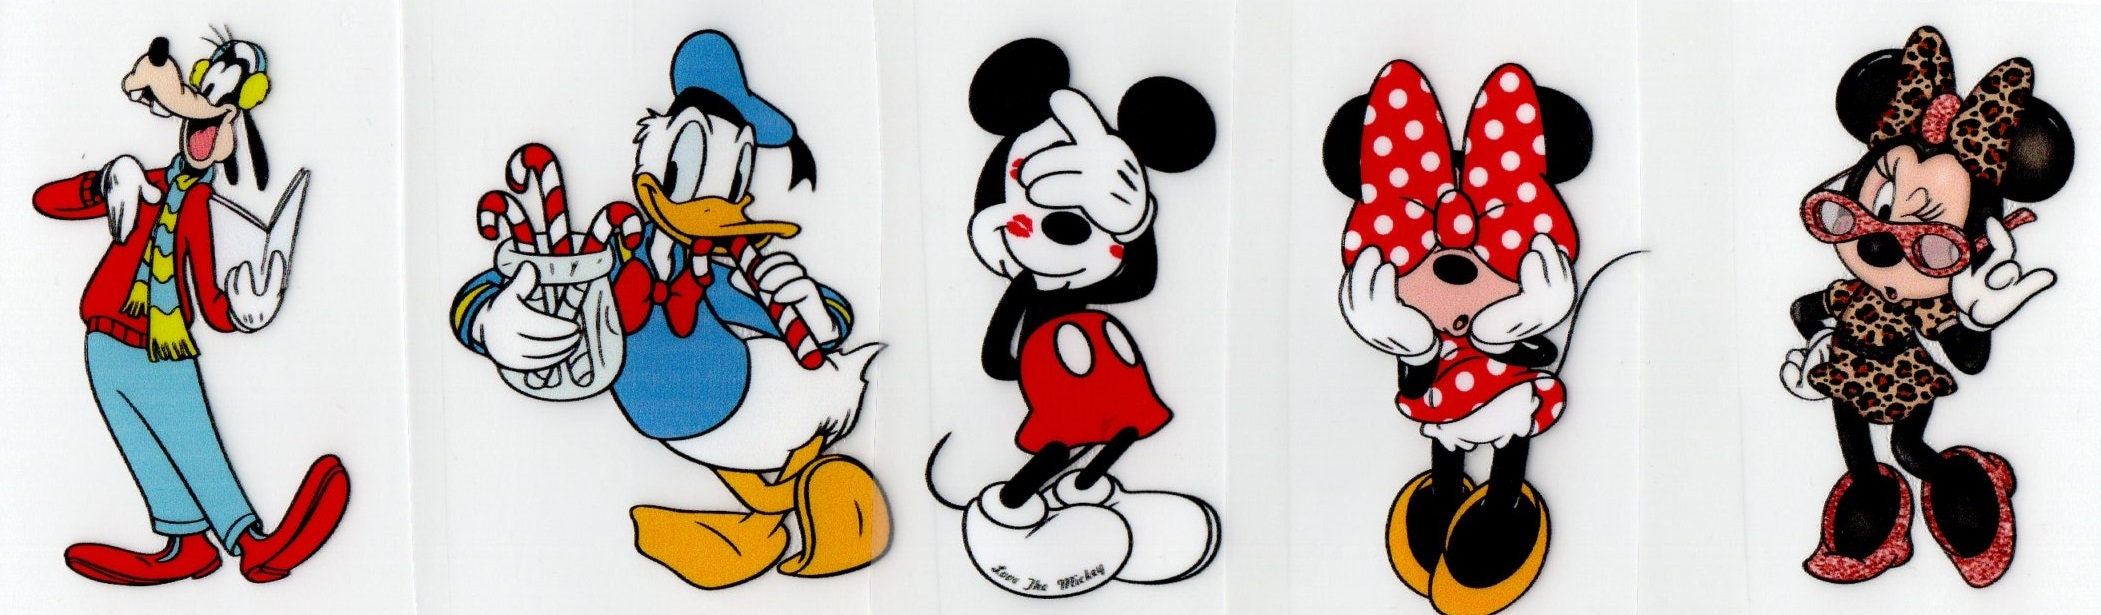 Iron on patches - Mickey Mouse 90 Years 02 Mickey nineties special Edition  Disney - red - 6,5 x 6,5 cm - Application Embroided badges